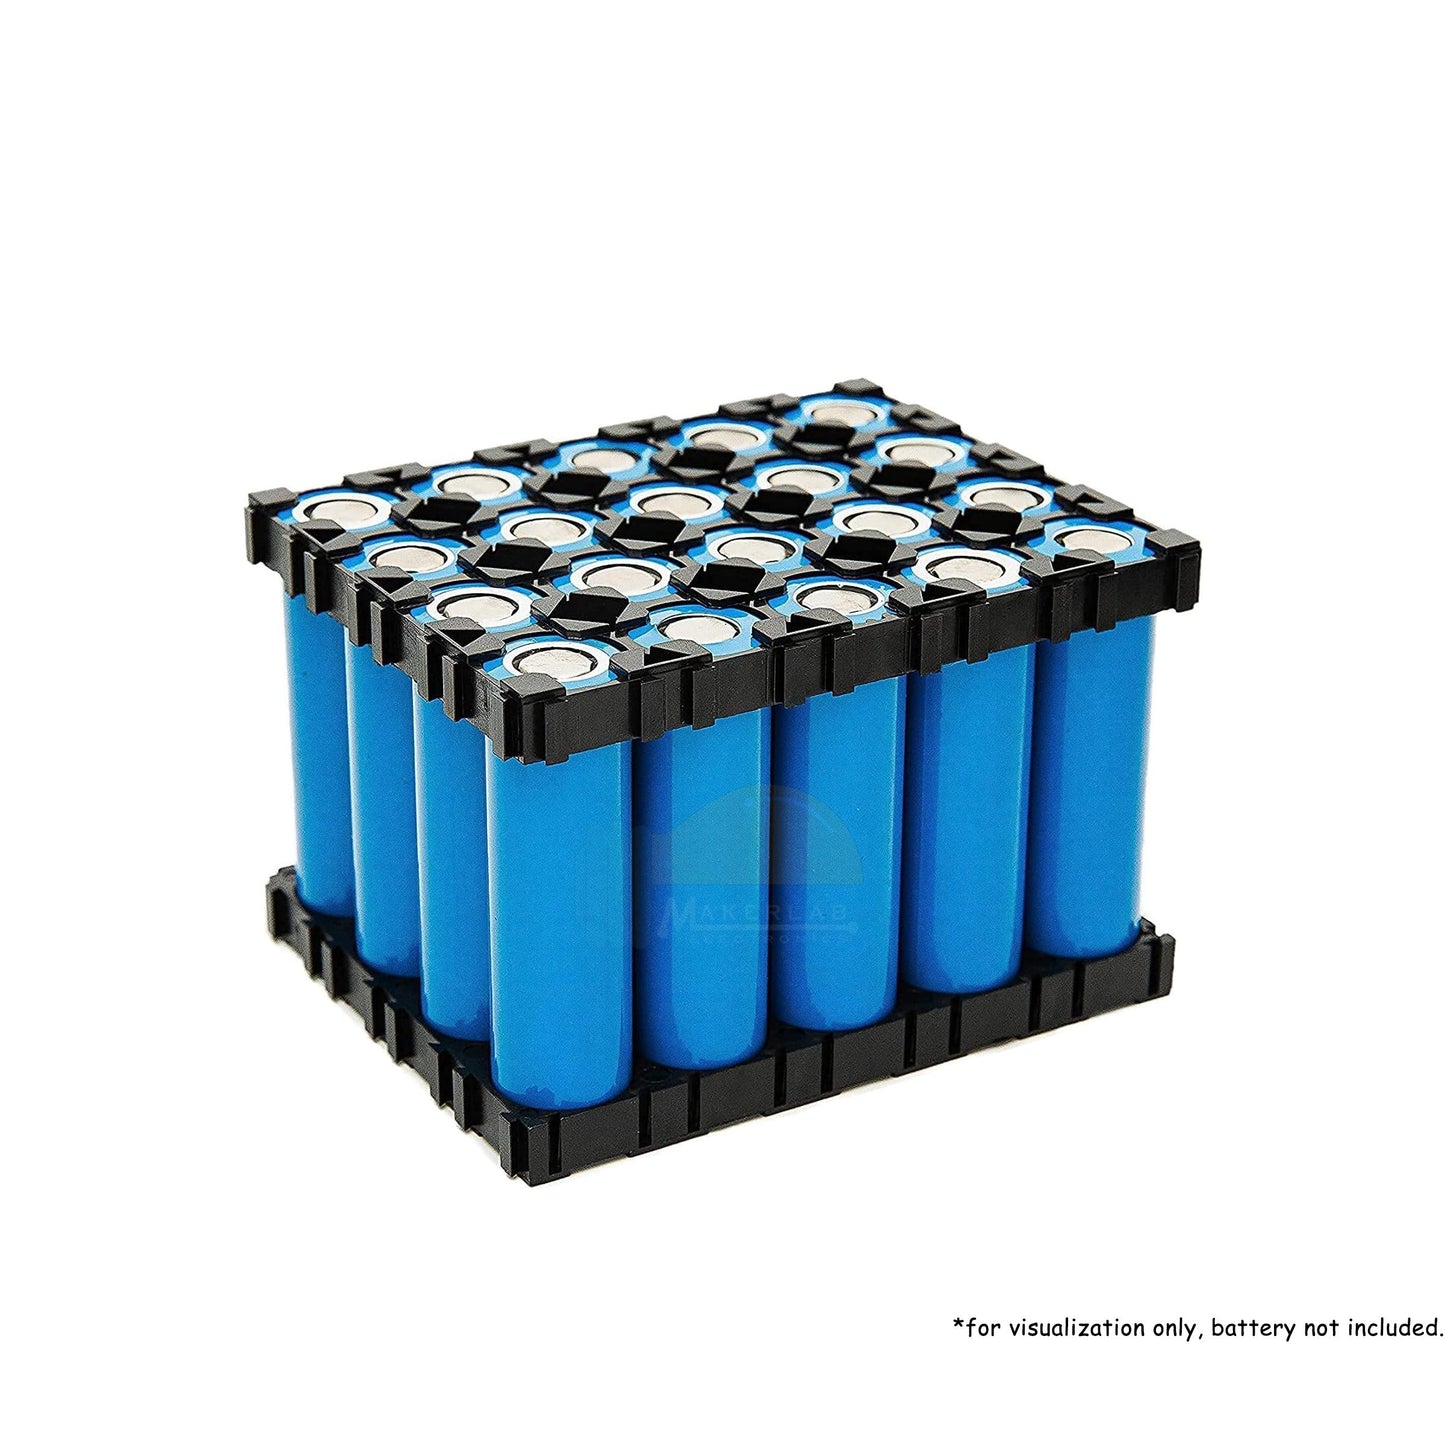 3 x 32650 Battery Holder with 32.35mm Bore Diameter